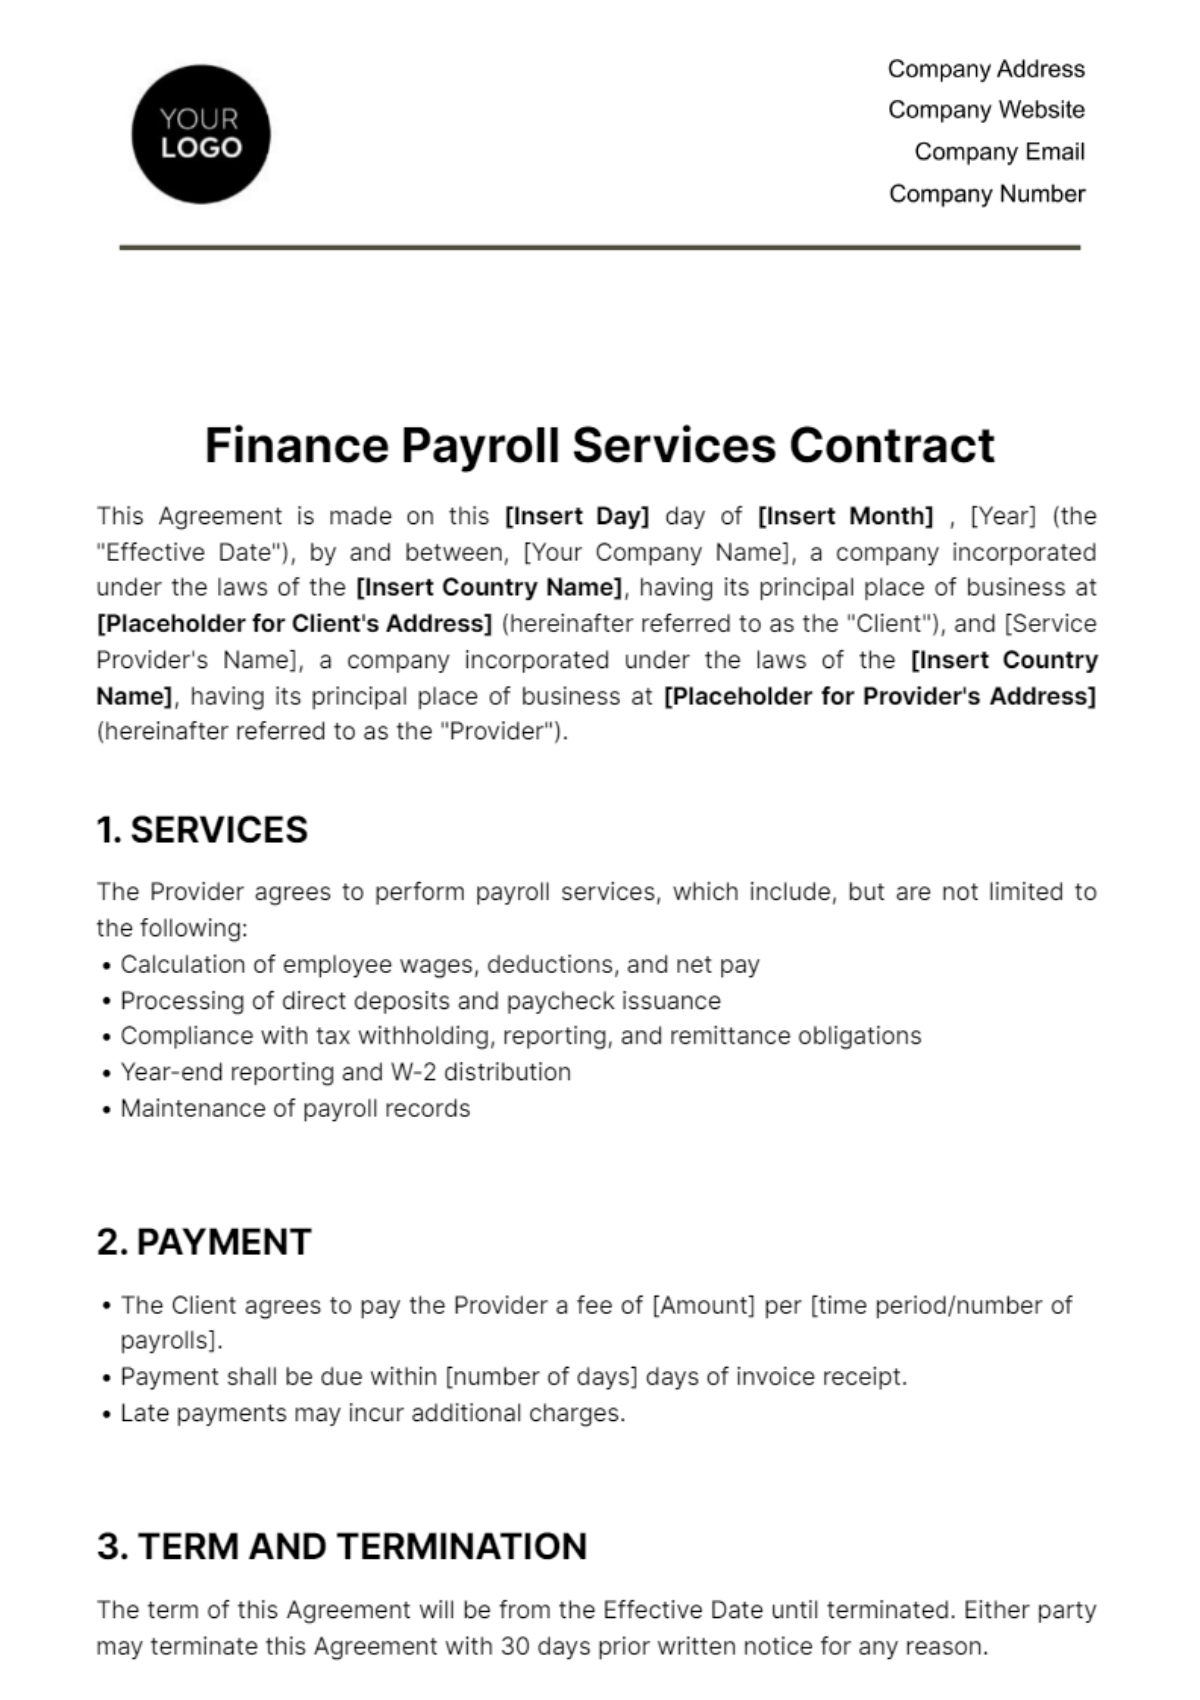 Finance Payroll Services Contract Template